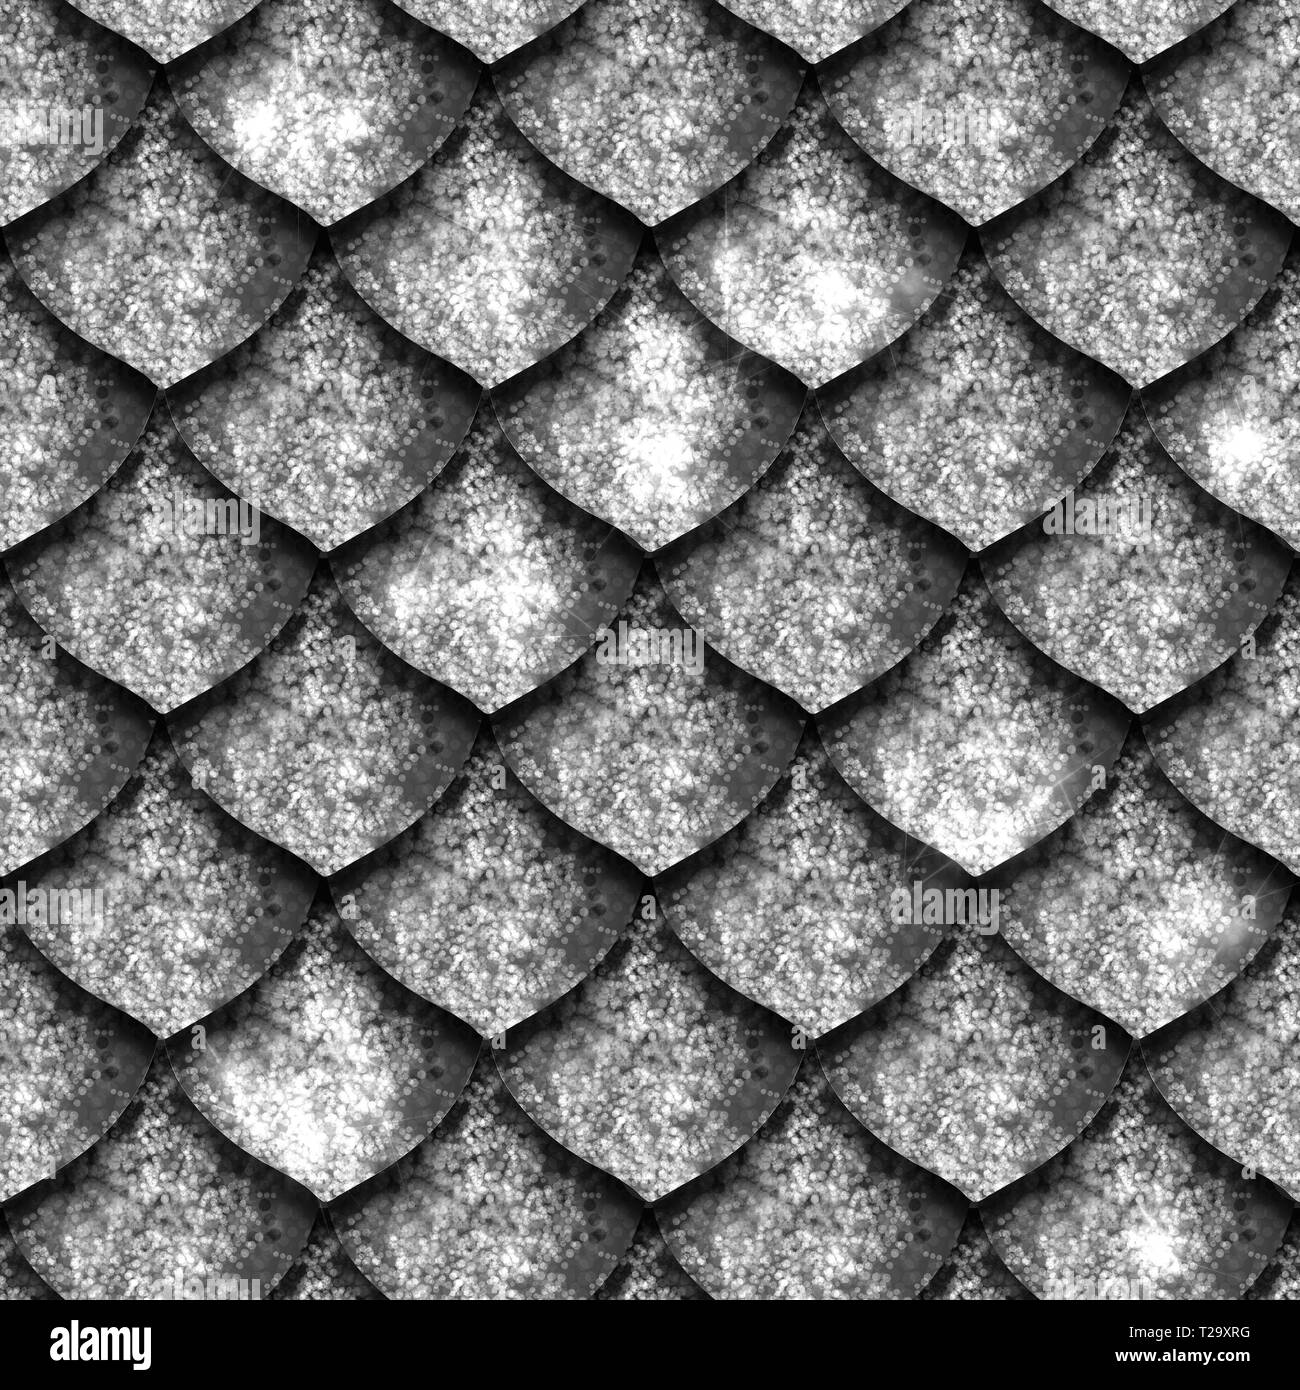 https://c8.alamy.com/comp/T29XRG/seamless-texture-of-dragon-scales-reptile-skin-T29XRG.jpg